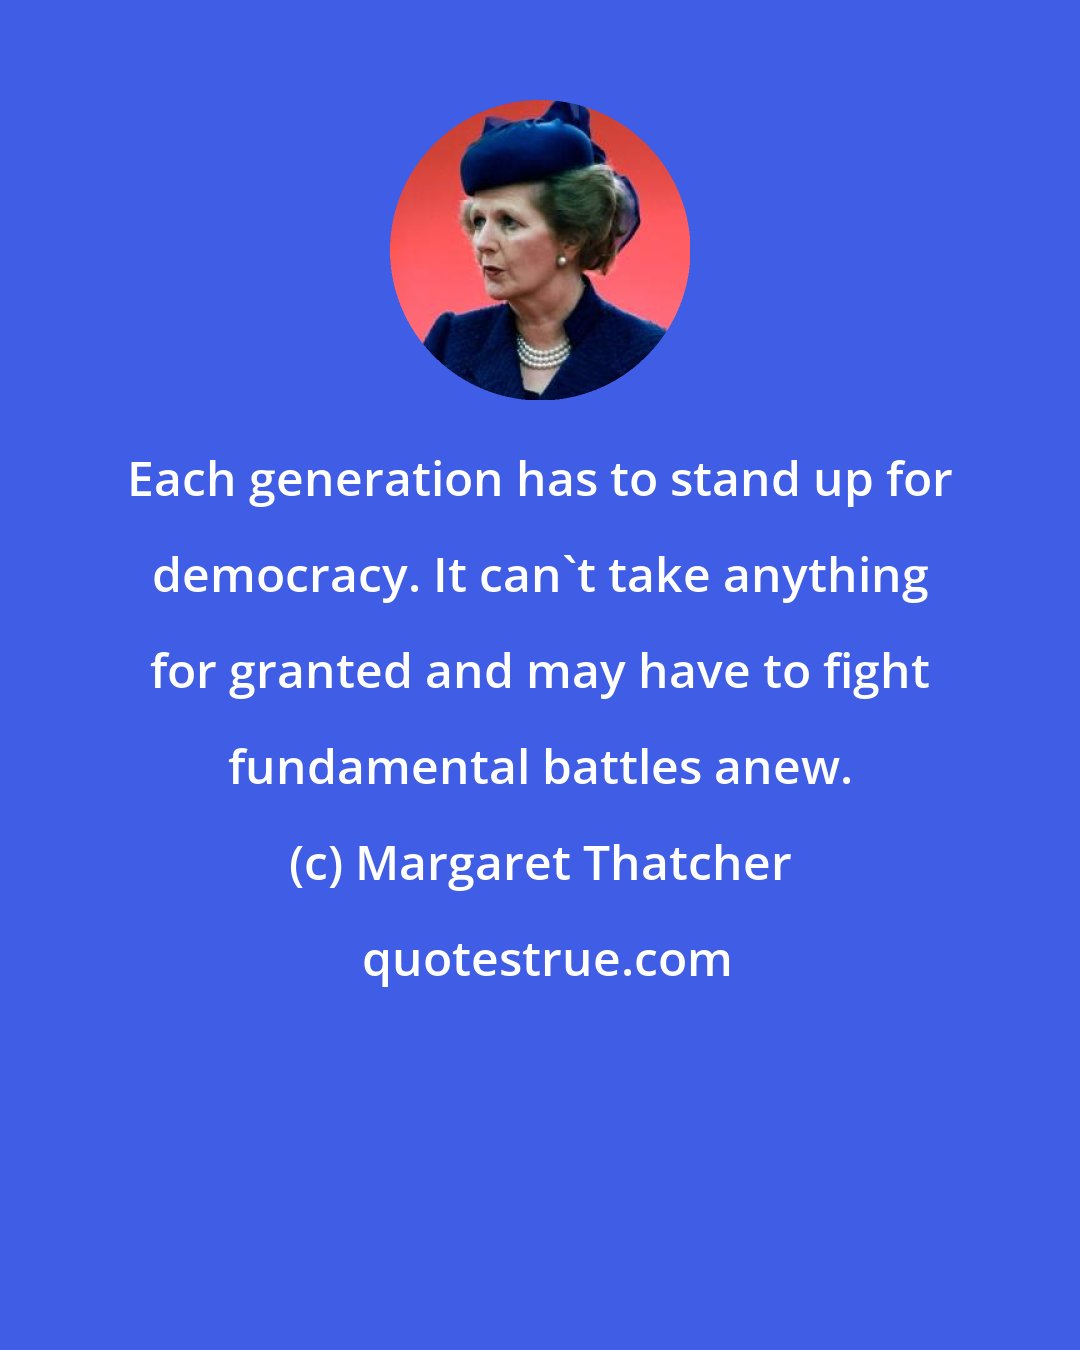 Margaret Thatcher: Each generation has to stand up for democracy. It can't take anything for granted and may have to fight fundamental battles anew.